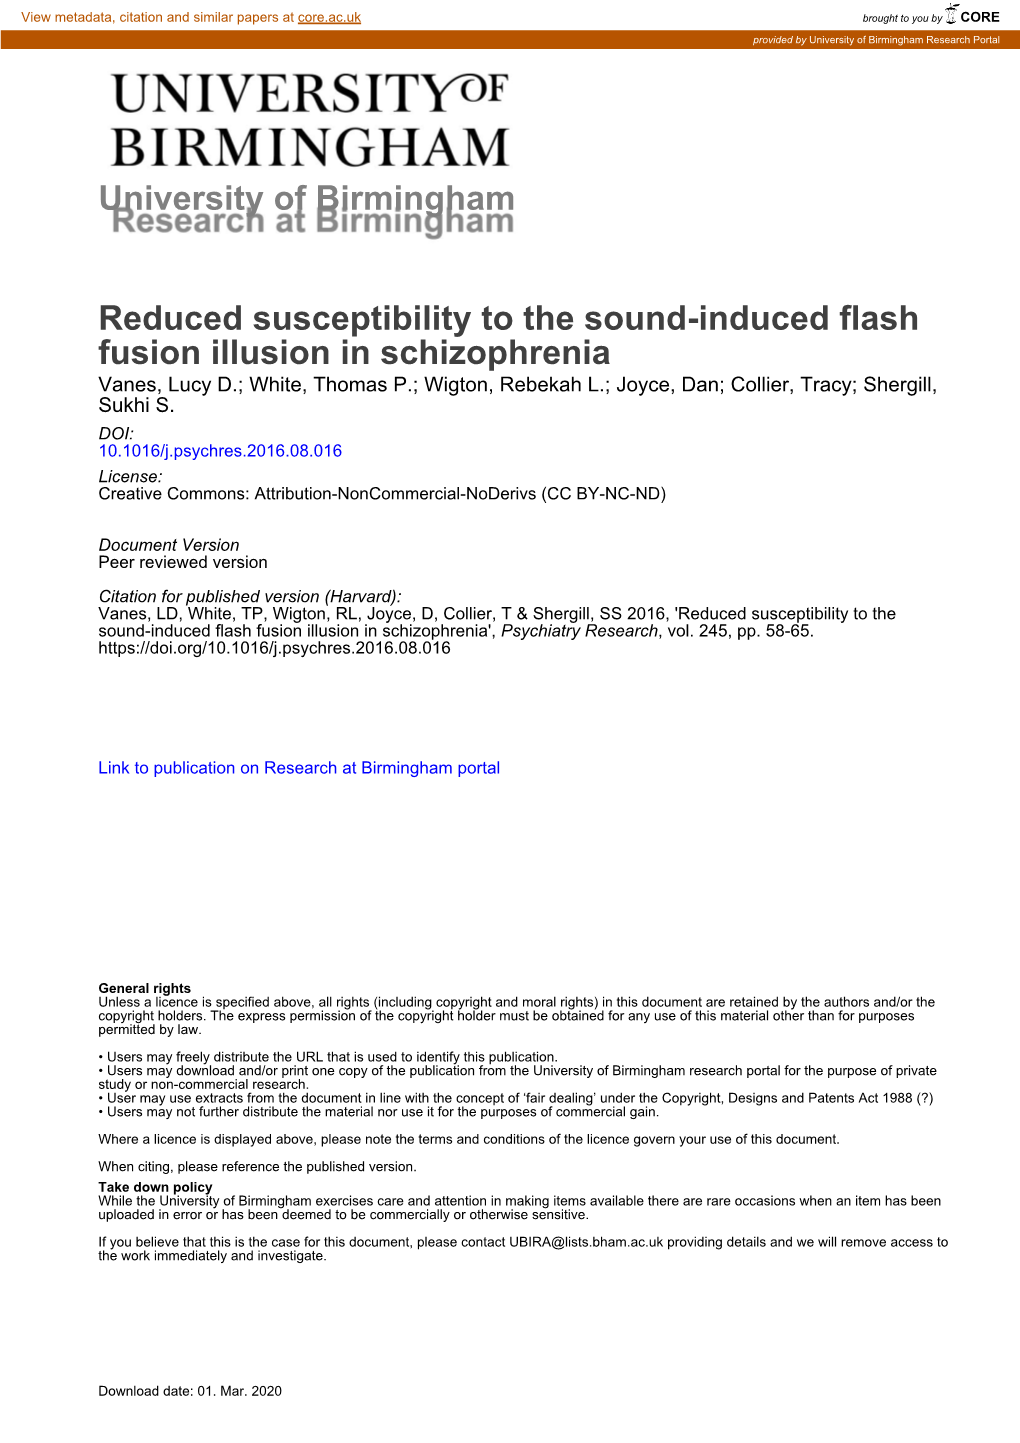 Reduced Susceptibility to the Sound-Induced Flash Fusion Illusion in Schizophrenia